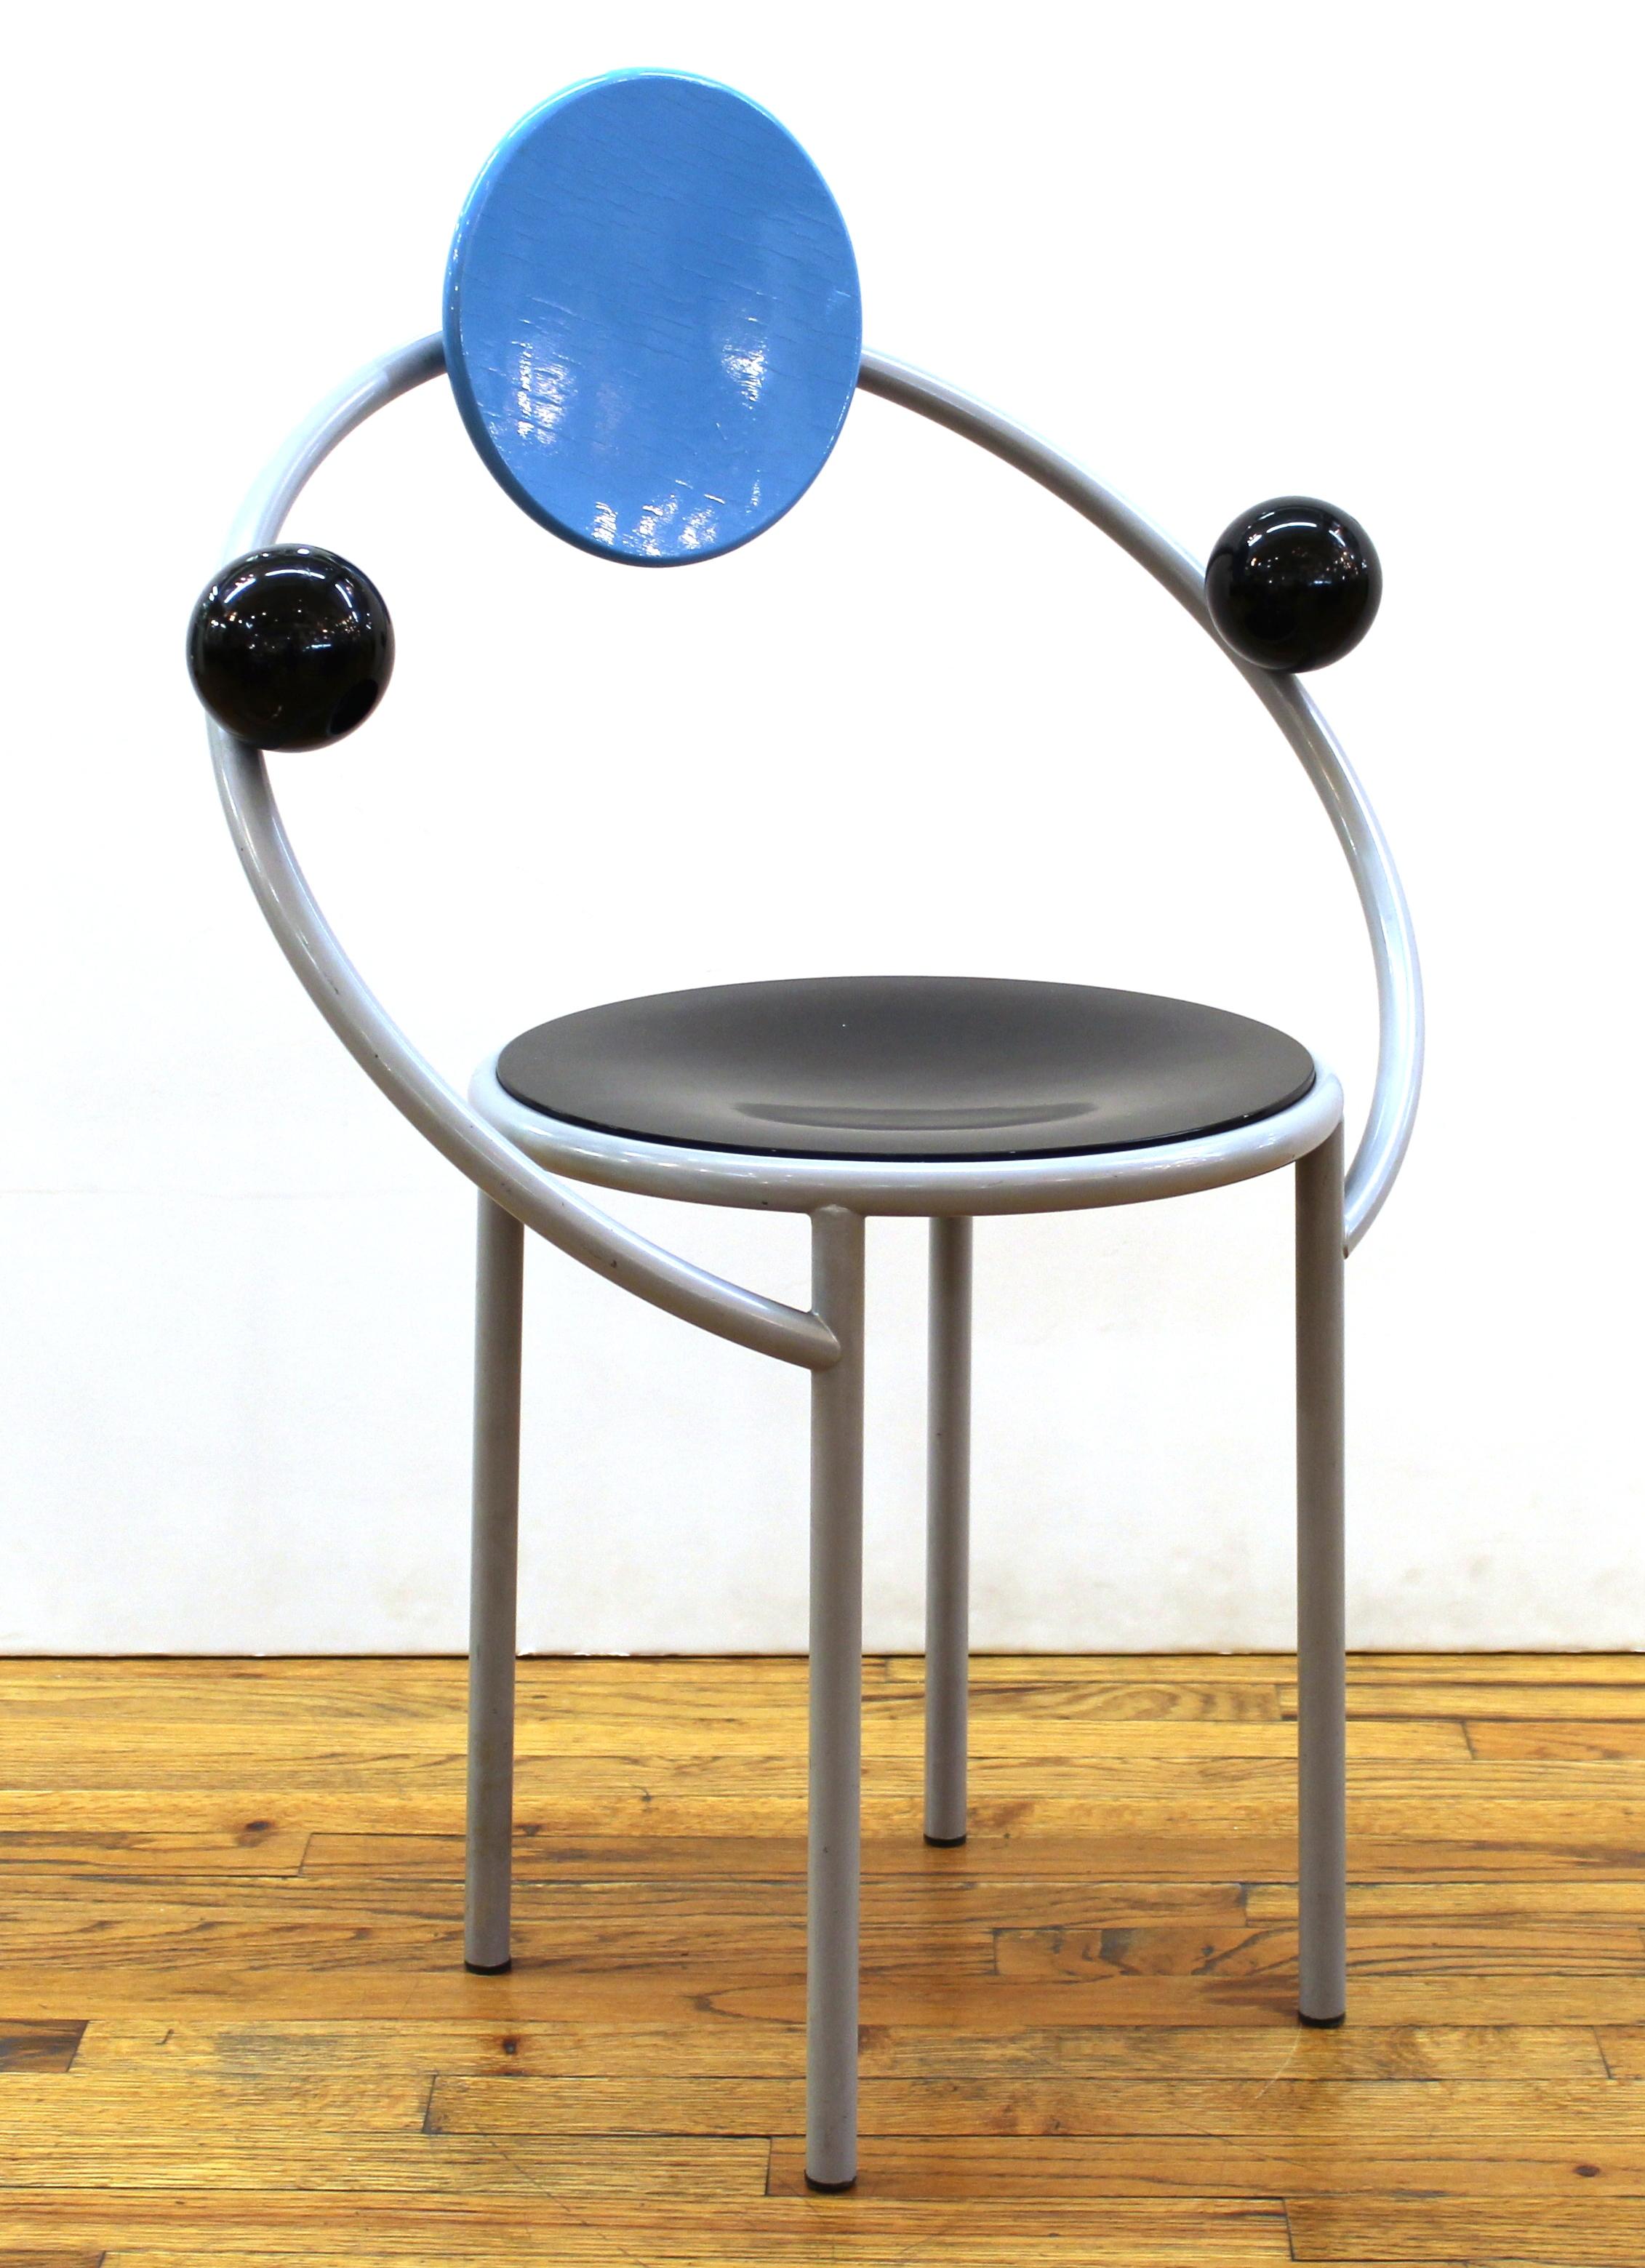 Michele de Lucchi Italian Postmodern Memphis 'First Chair' in enameled steel, lacquered wood back rest and ball armrests, made in circa 1983. Stenciled manufacturer's mark to underside. Measures: 35.5